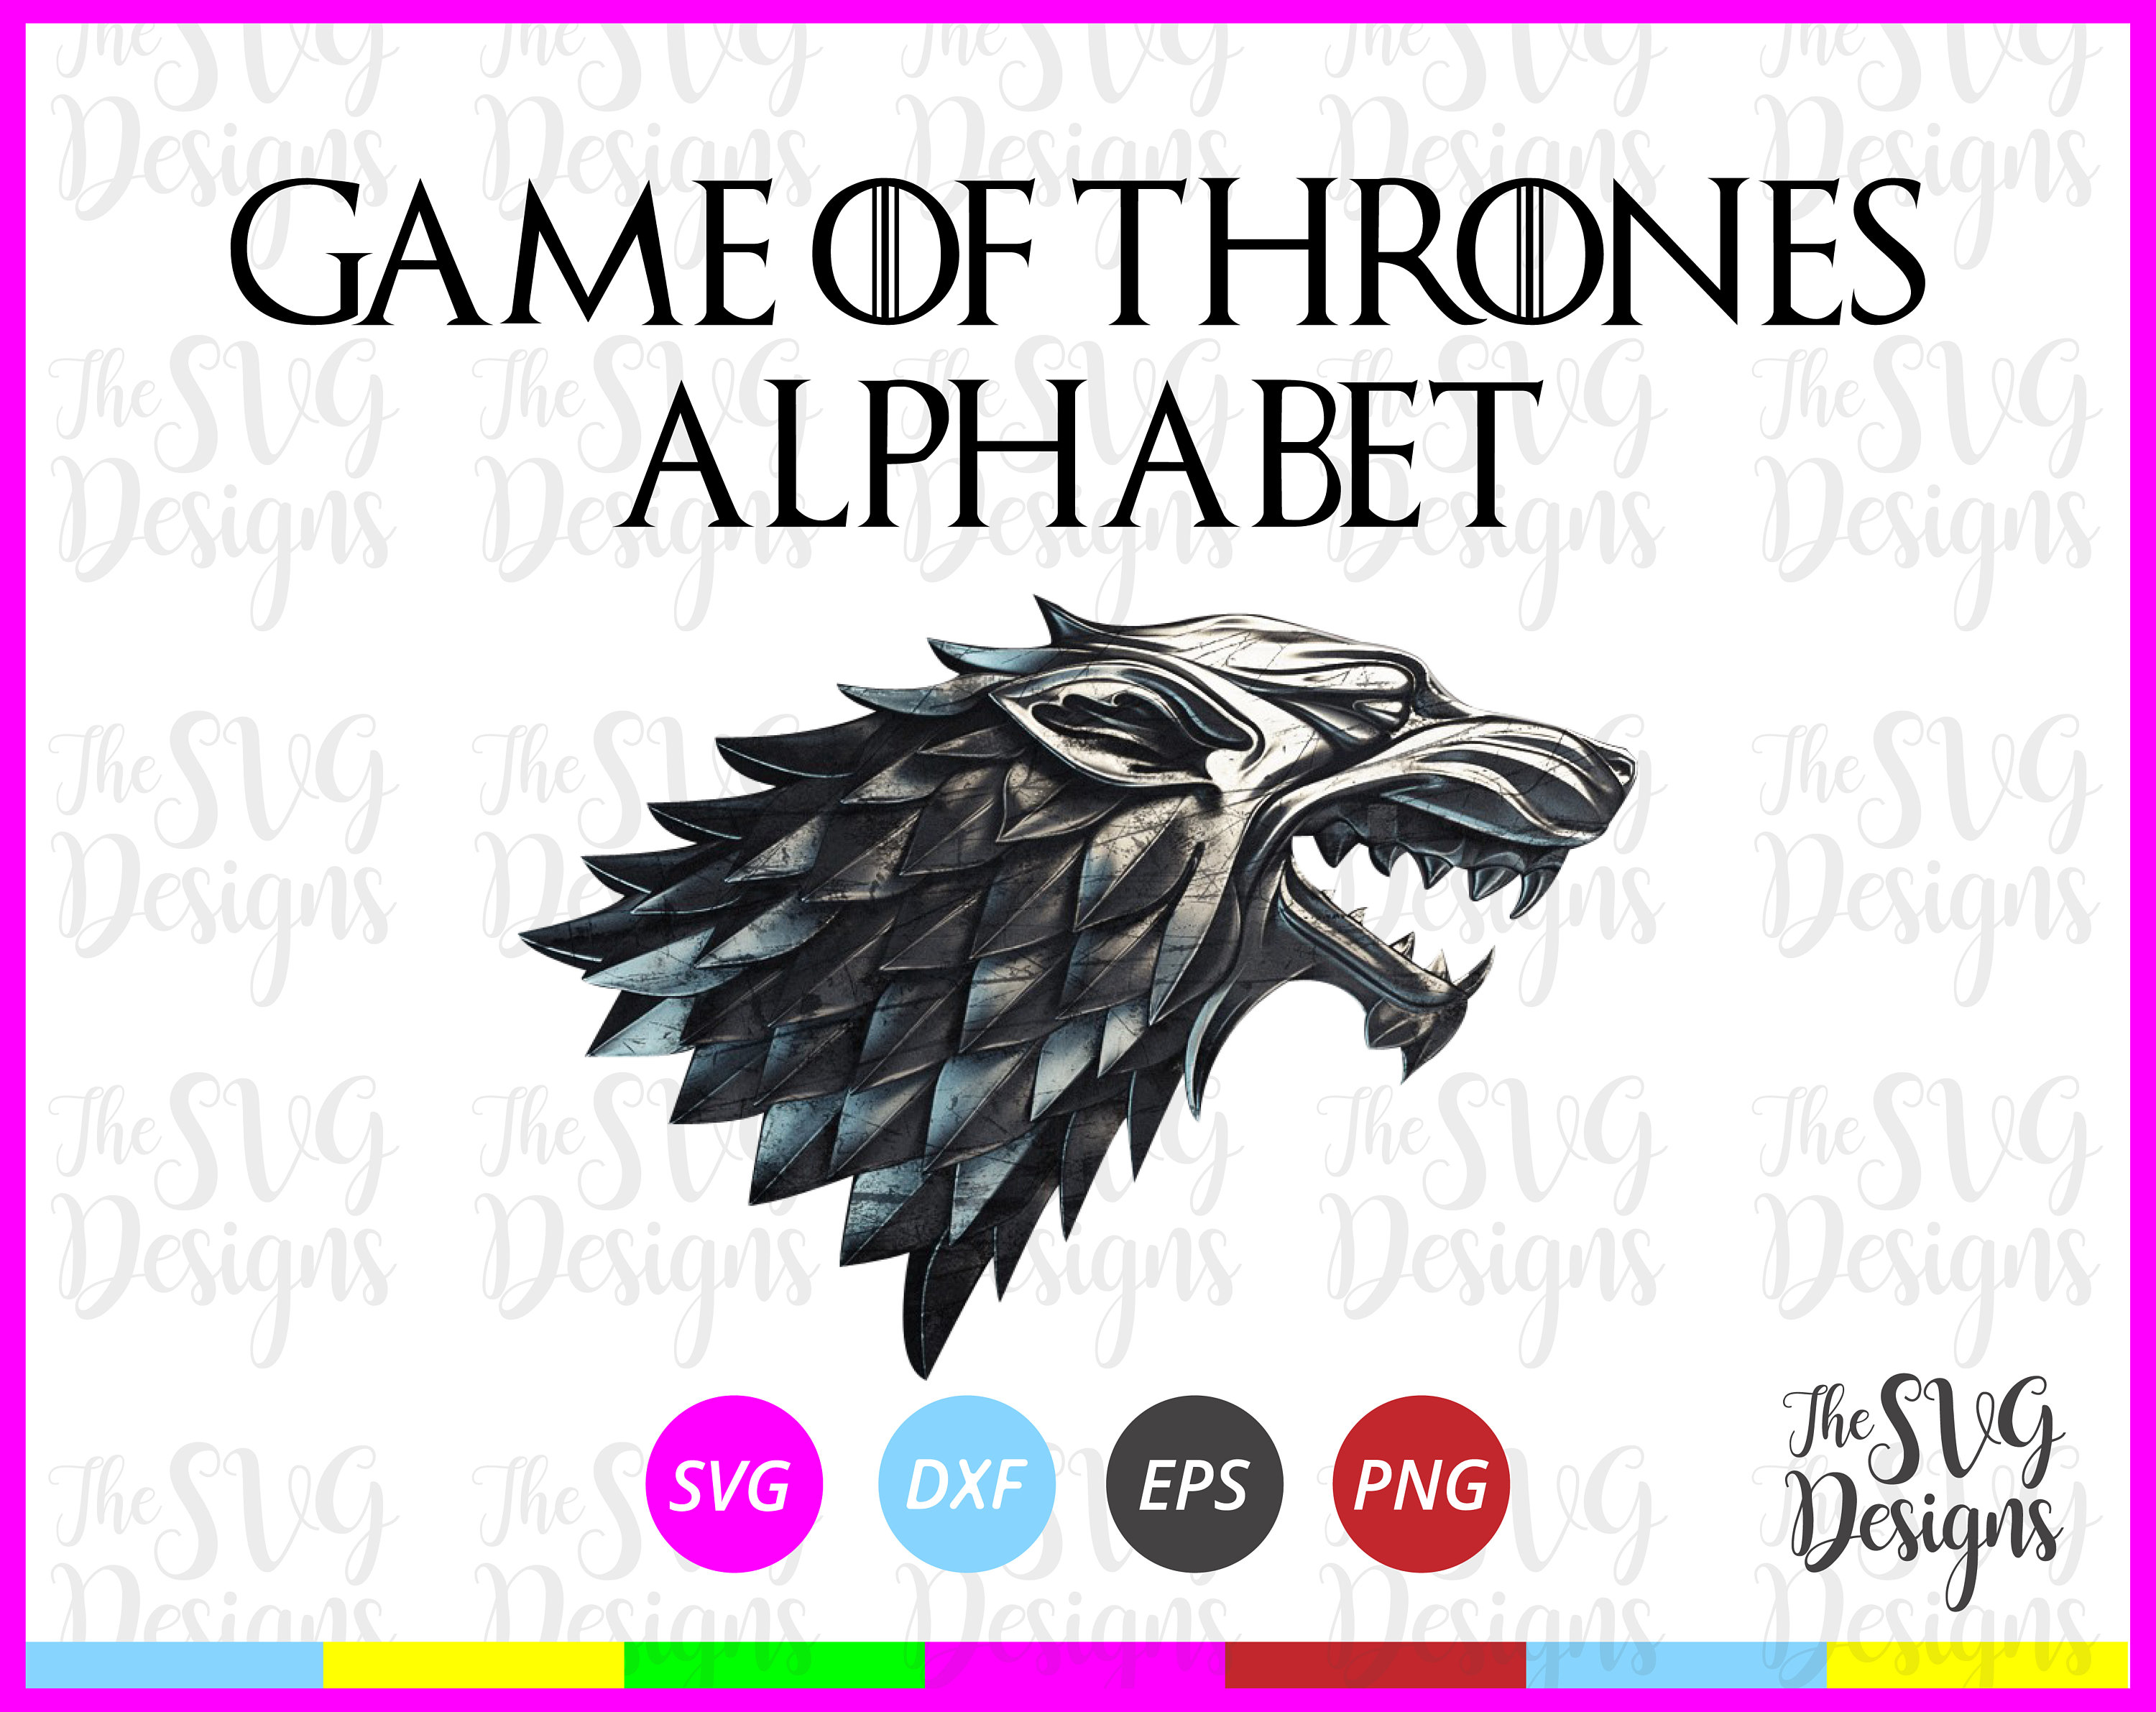 words in game of thrones font